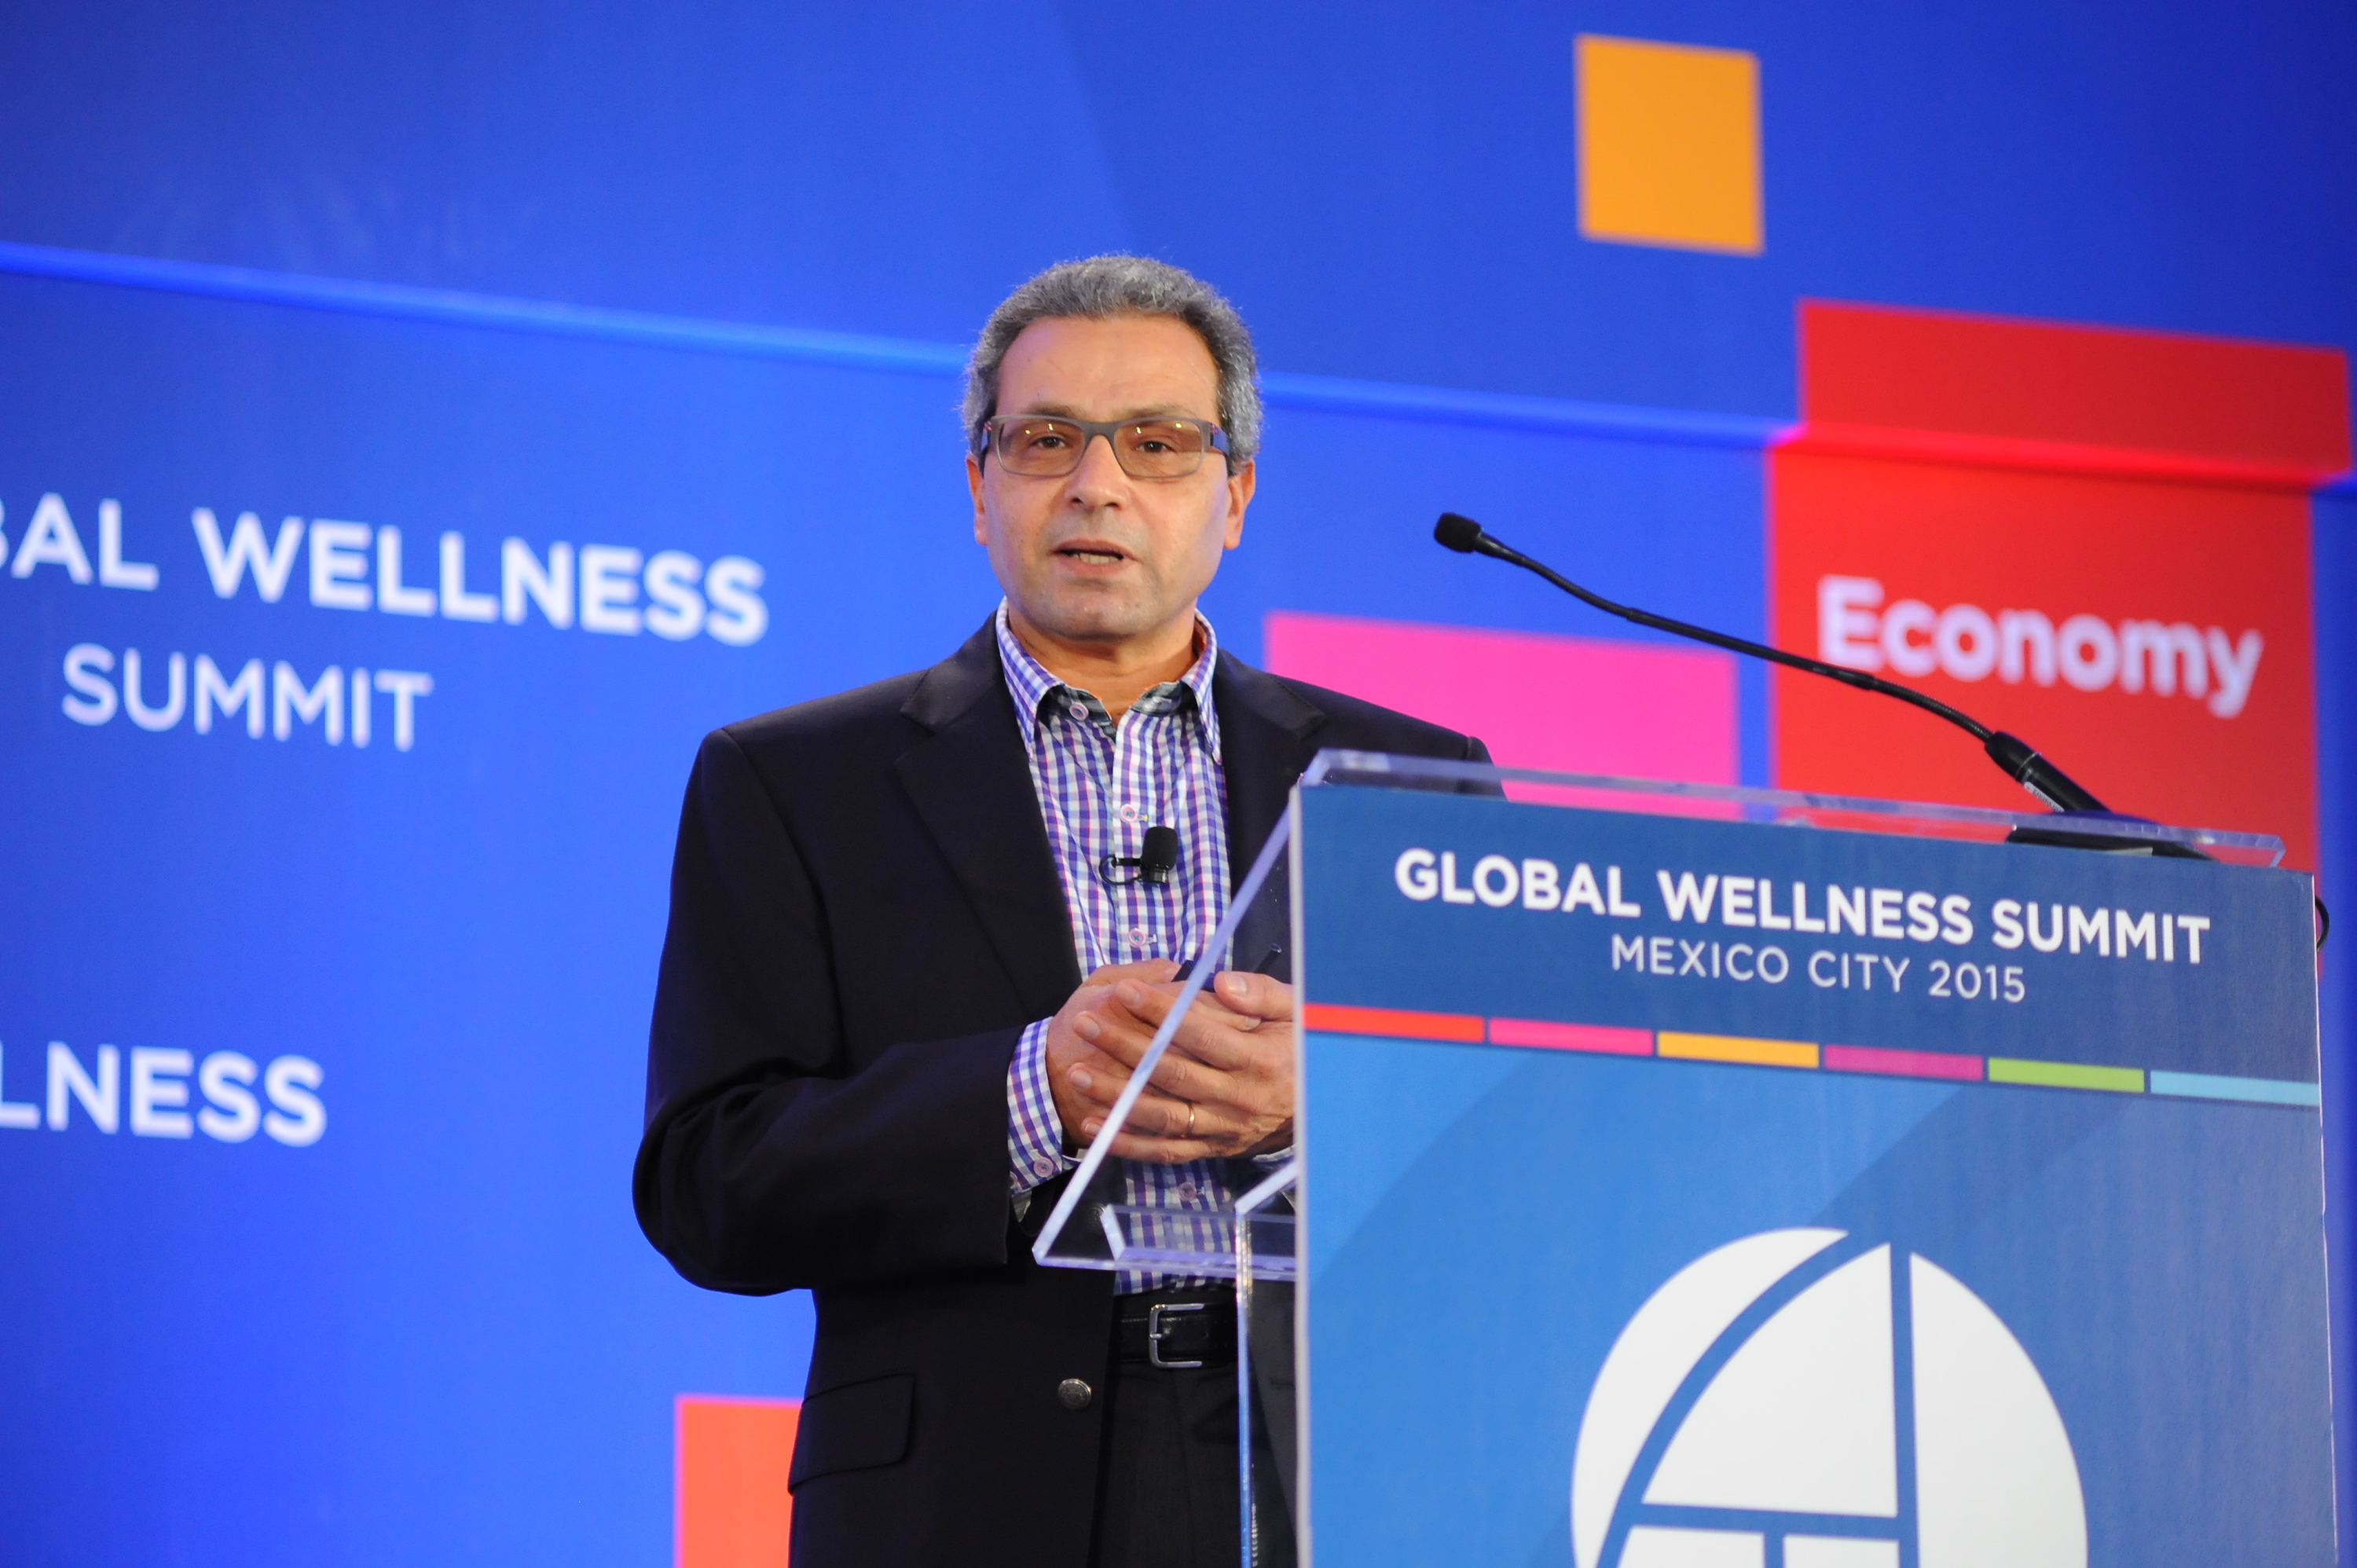 Dr. Fikry Issac (VP, Global Health Services, Johnson & Johnson) on "Workplace Wellness: Past, Present & Future"